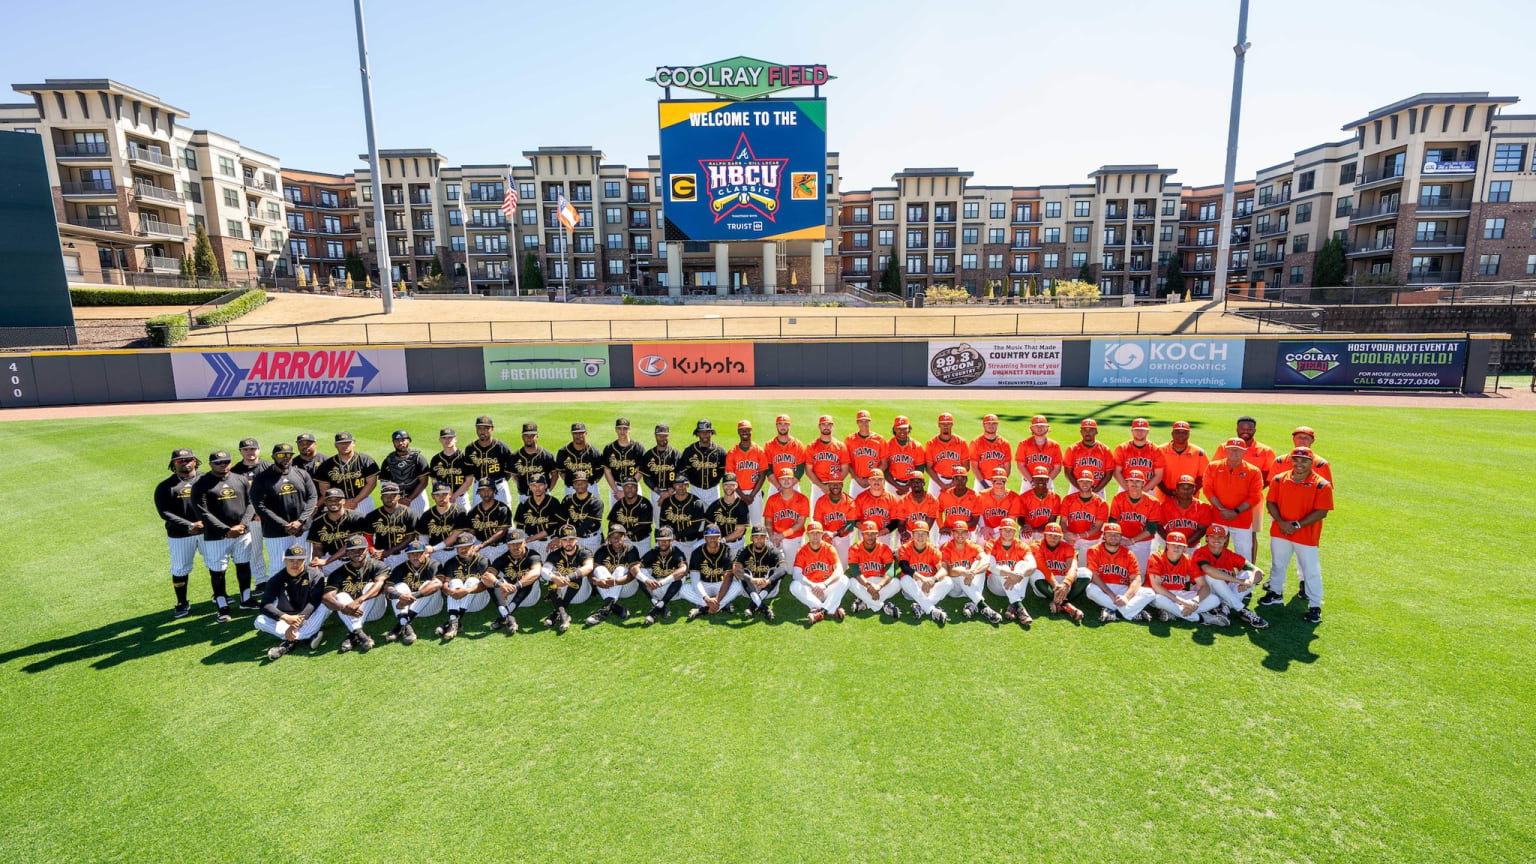 The rosters of Grambling State and Florida A&M take a group photo together